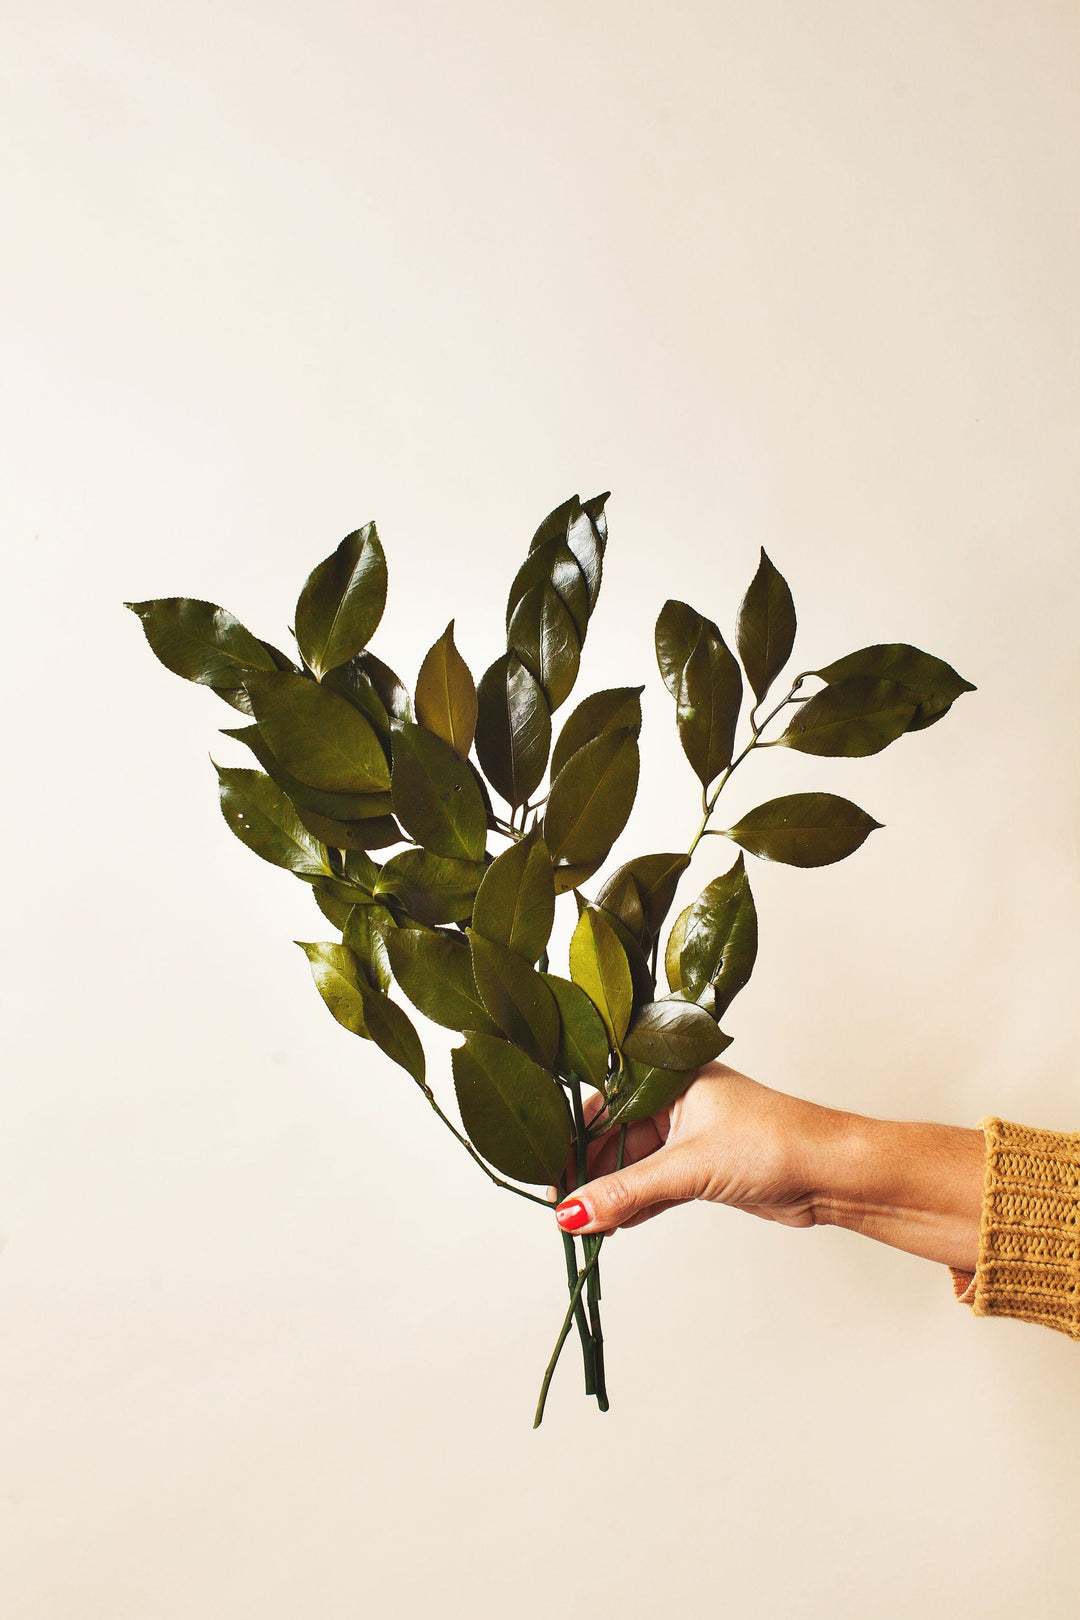 Idlewild Floral Co. Preserved Camelia Branches